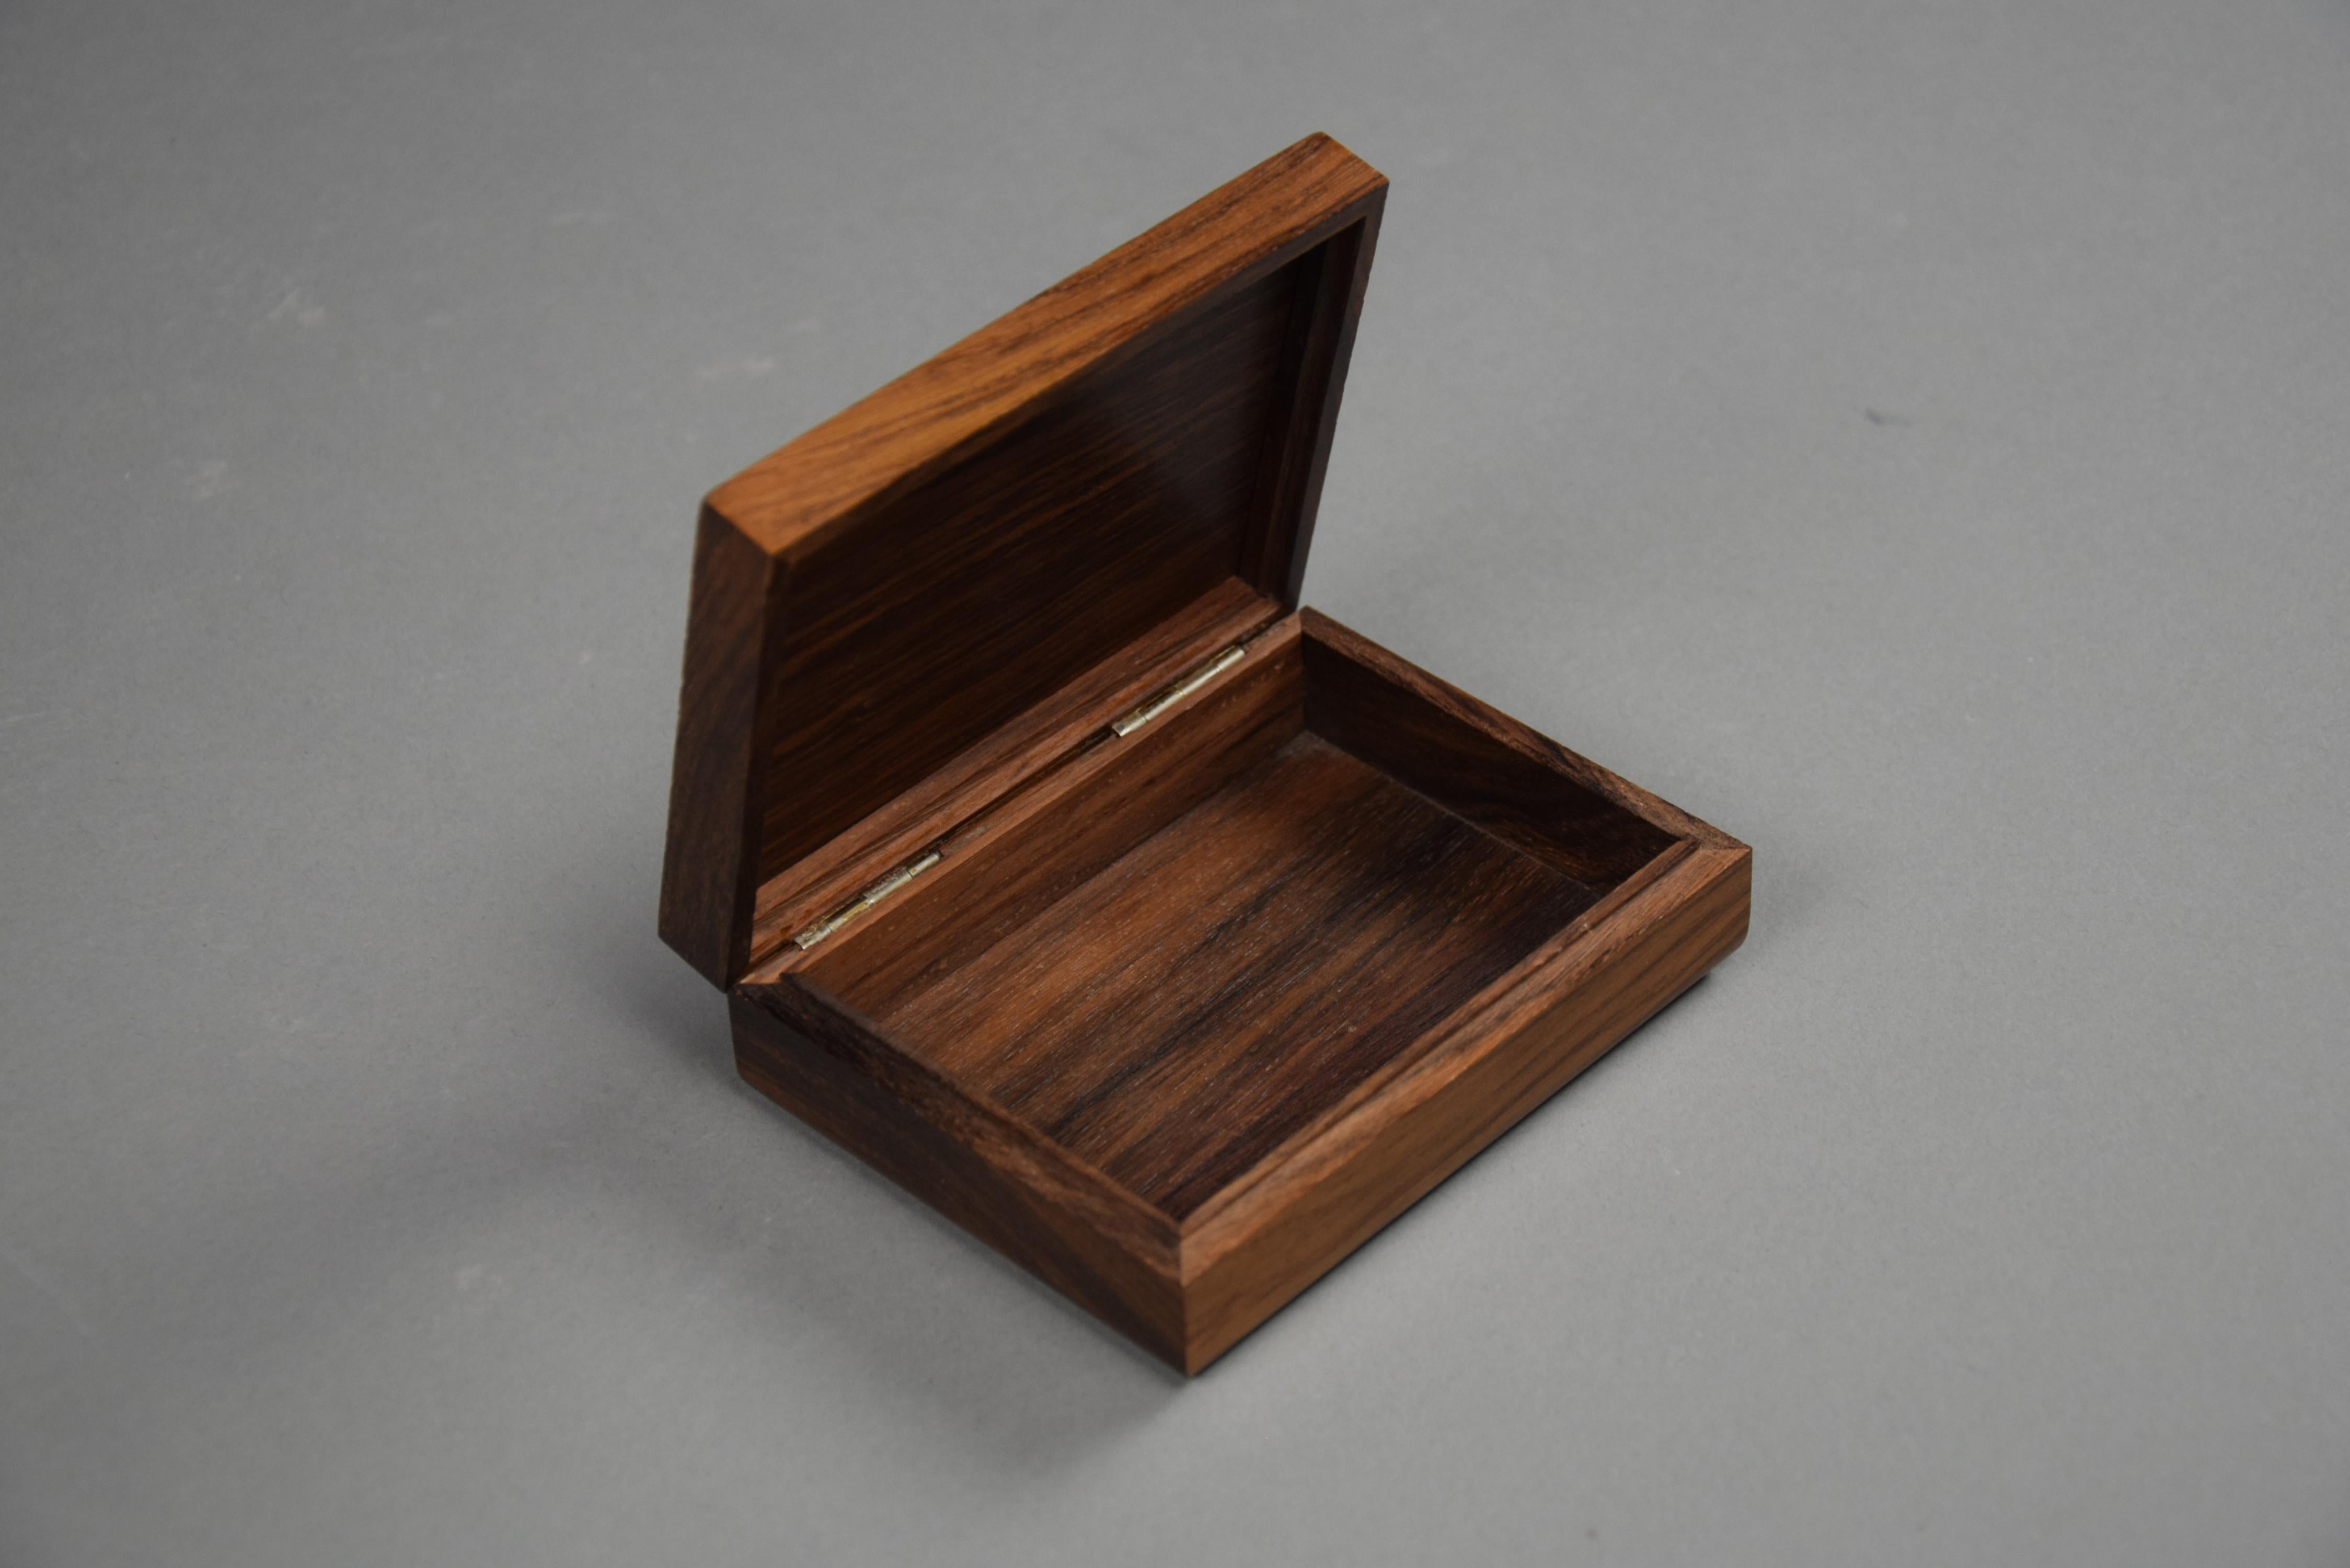 Introducing the epitome of sophistication: the Italian Mid Century Modern Jatoba Wood and Floral Decorated Silver Plated Cigarette Box by Ottaviani. Crafted with utmost precision and adorned with timeless elegance, this masterpiece adds a touch of